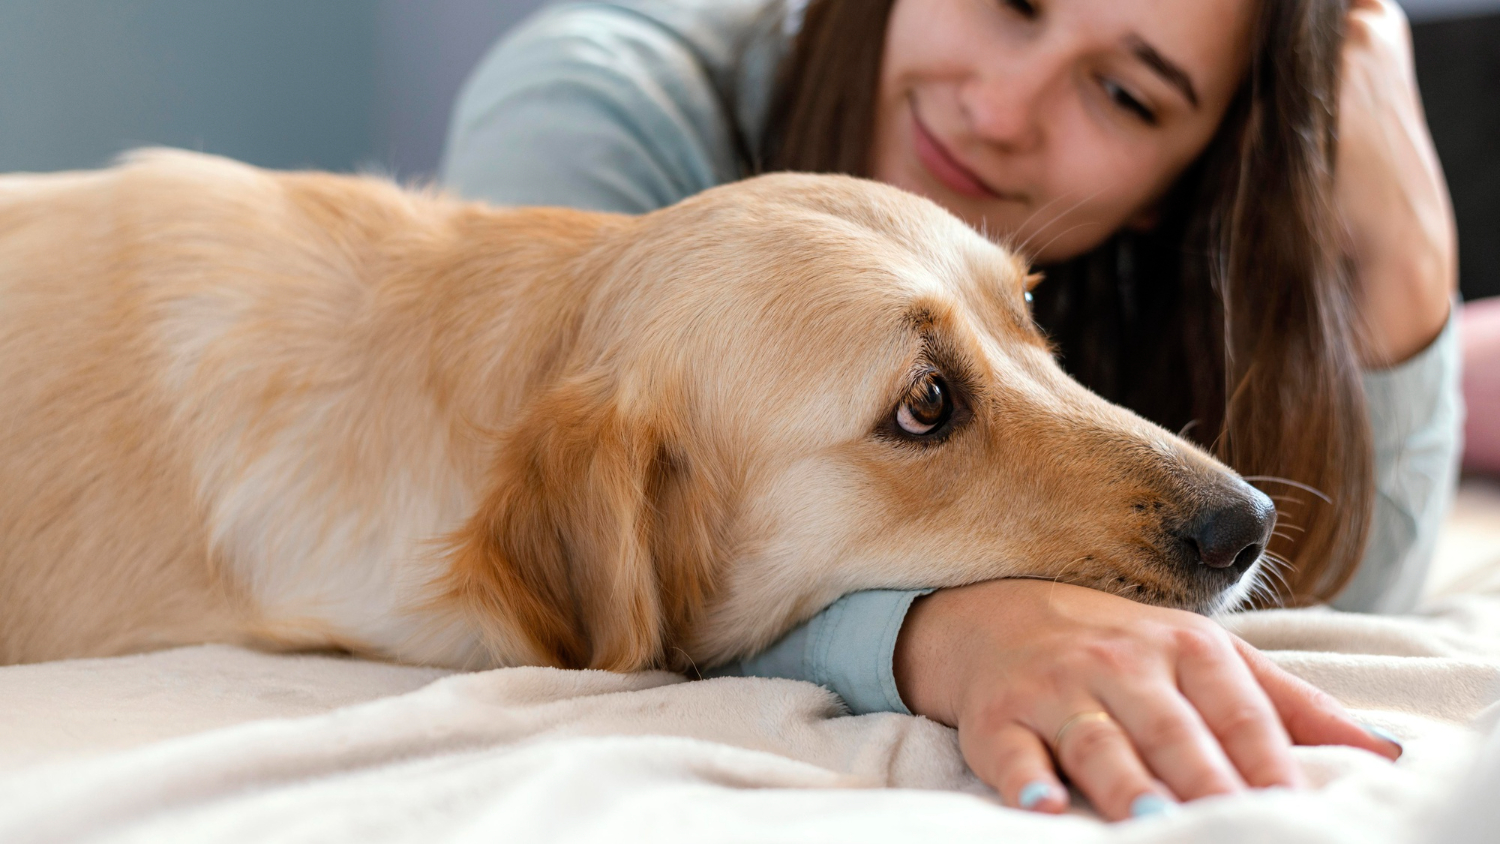 Allergies are some of the most common autoimmune diseases in dogs.